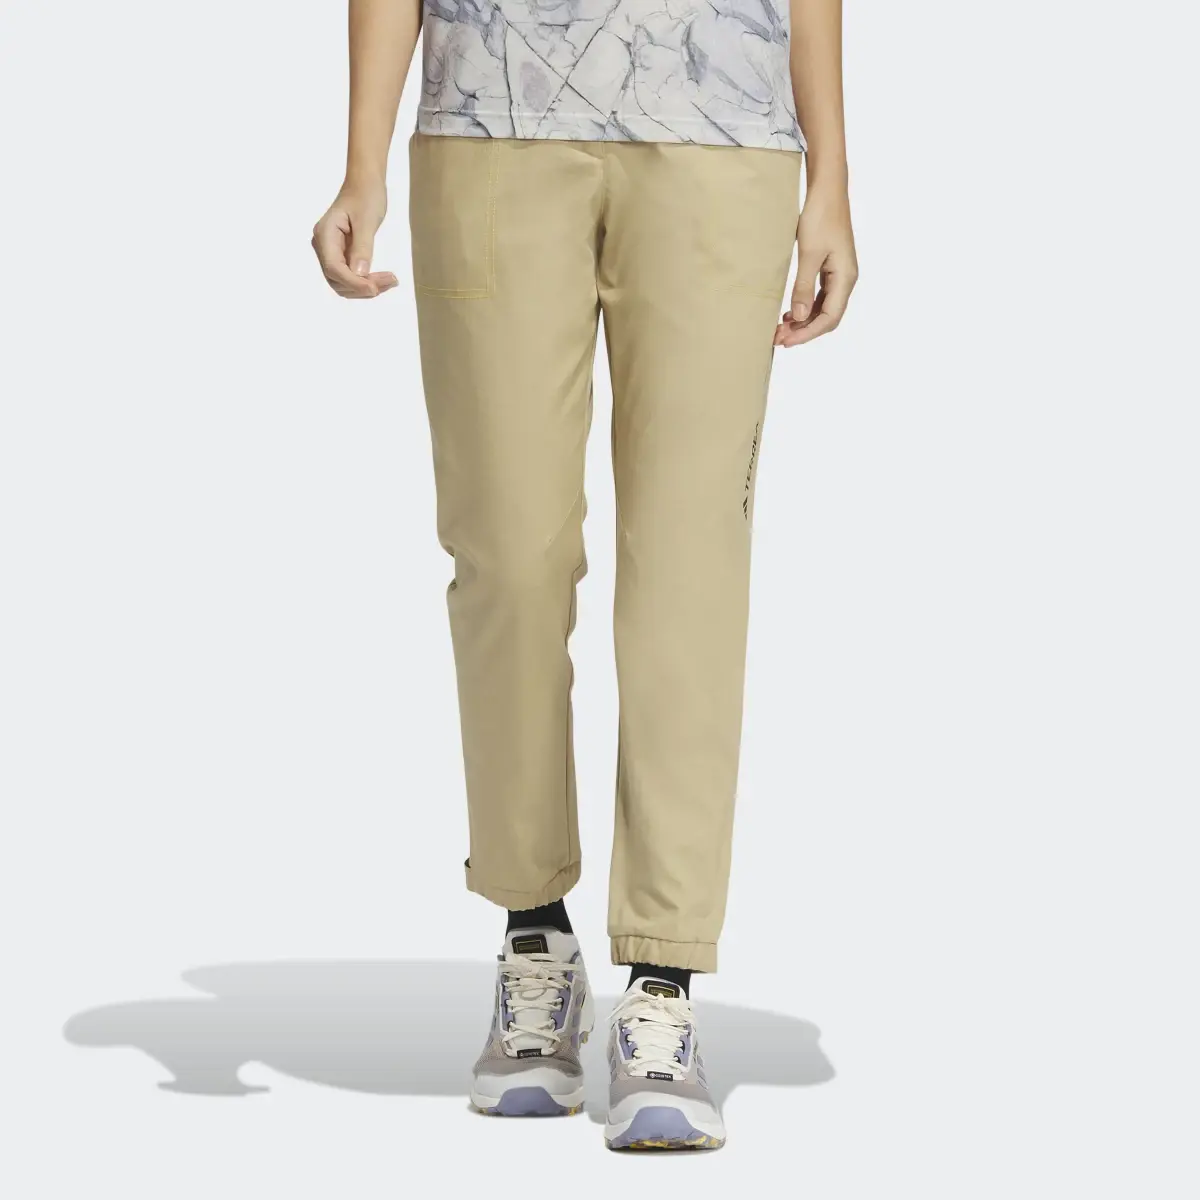 Adidas National Geographic Twill Trousers. 1